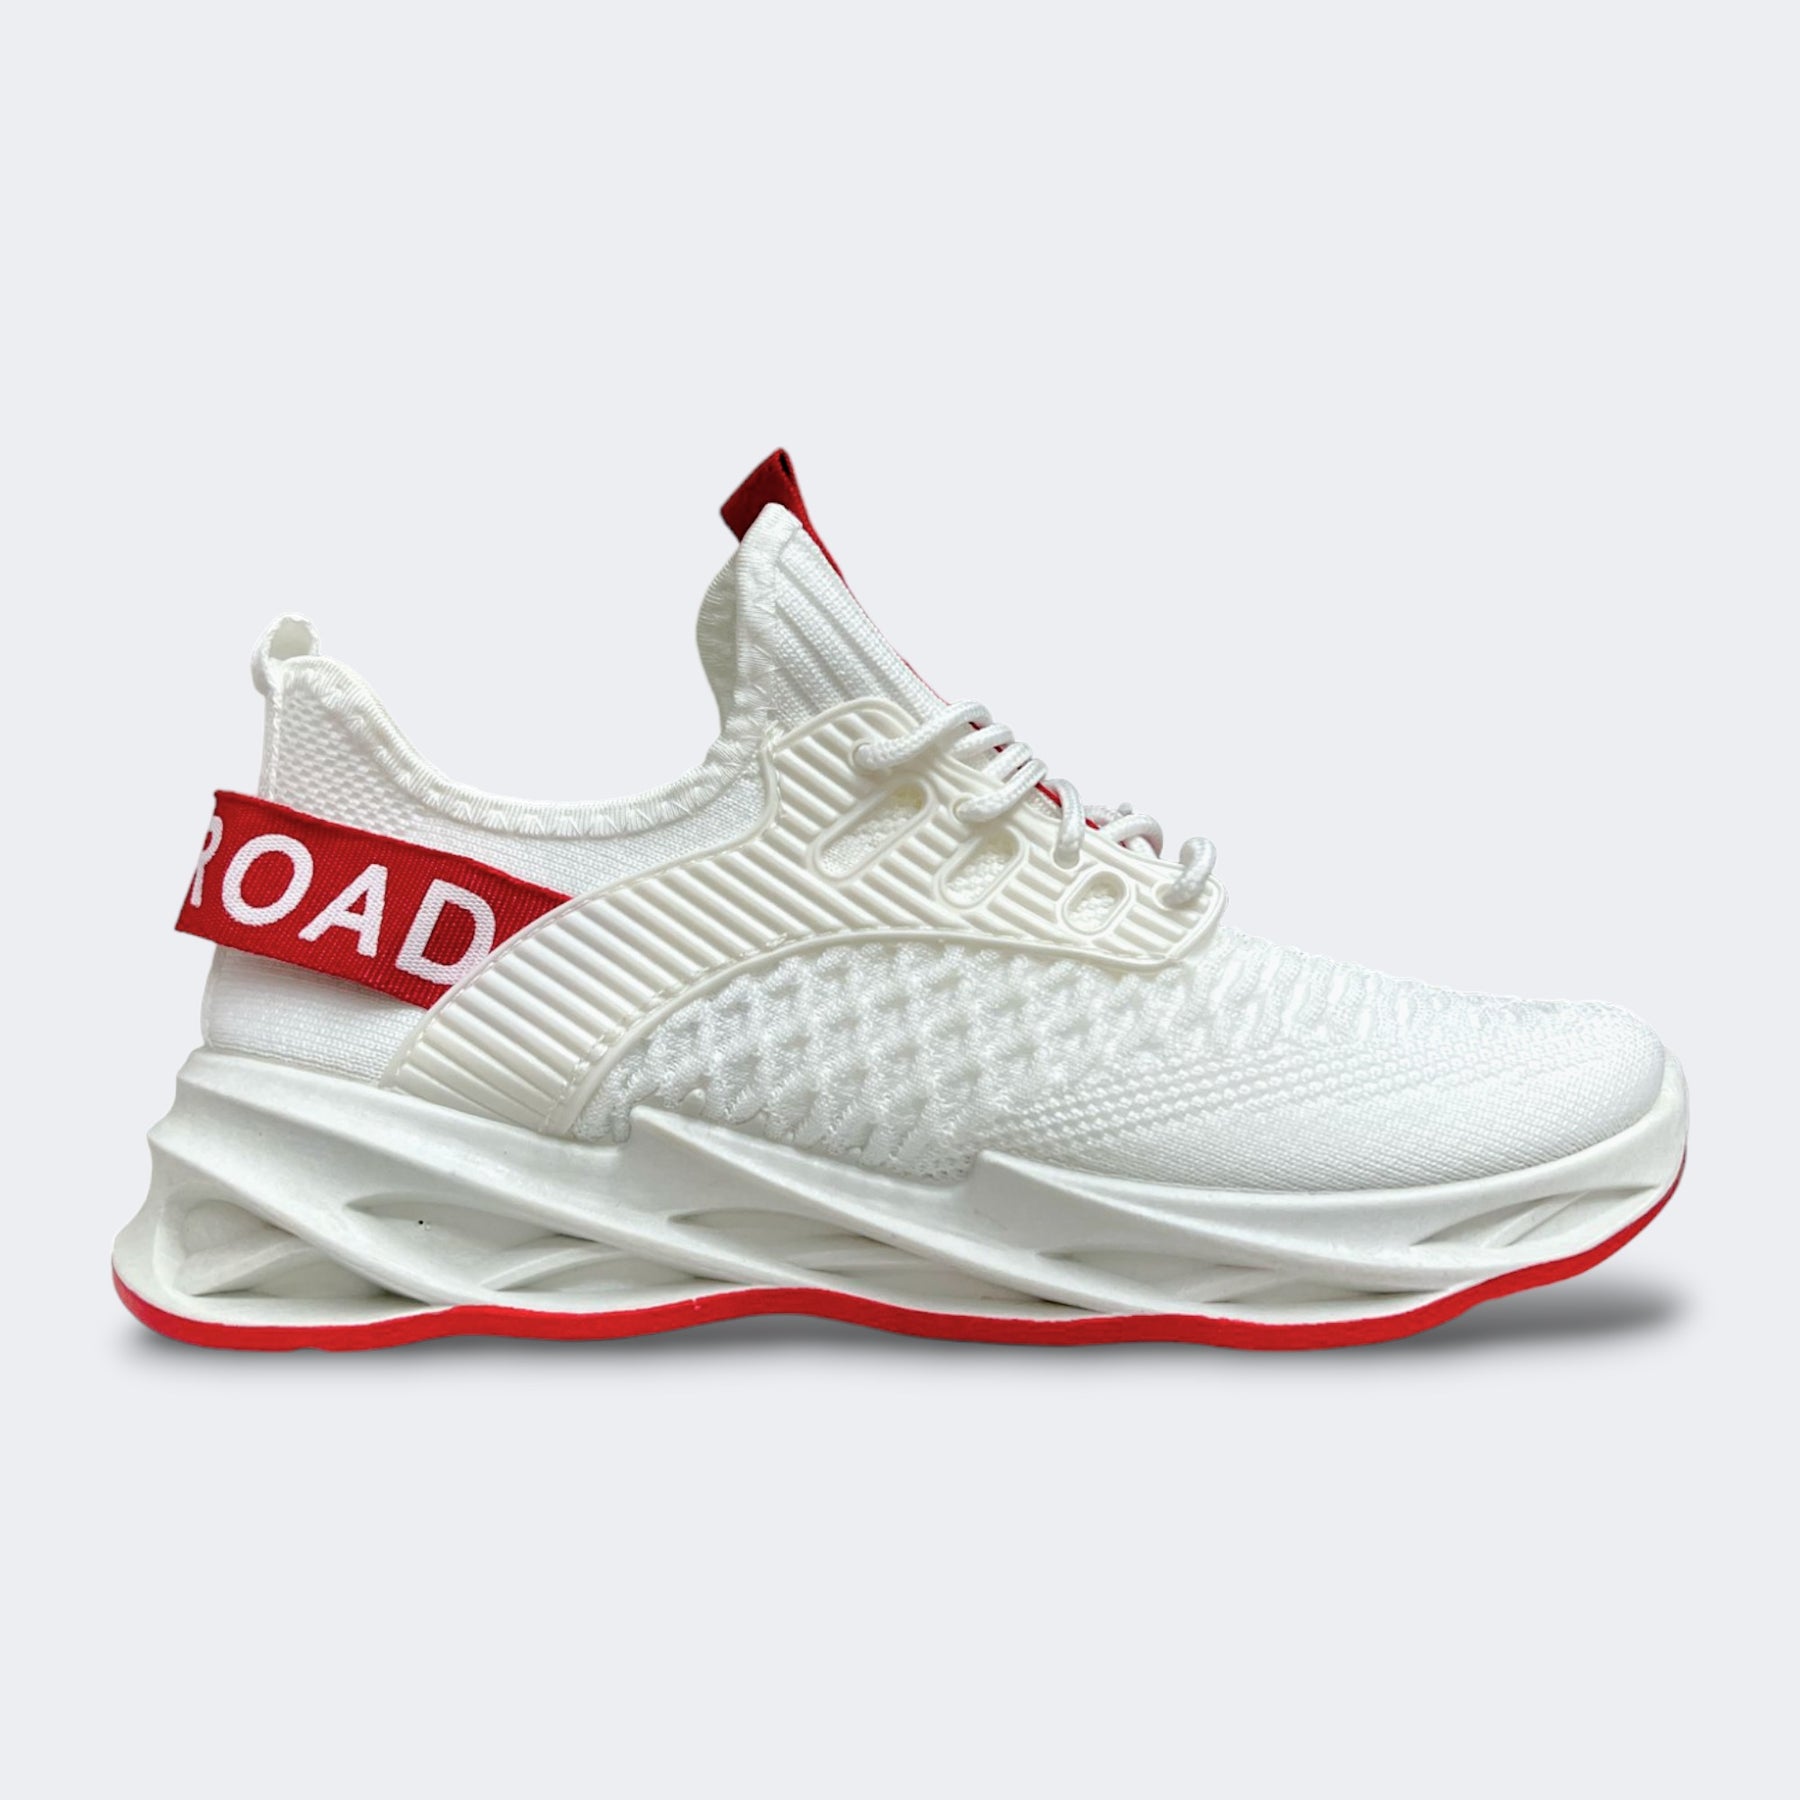 Fast Road Ivory Mesh Runners